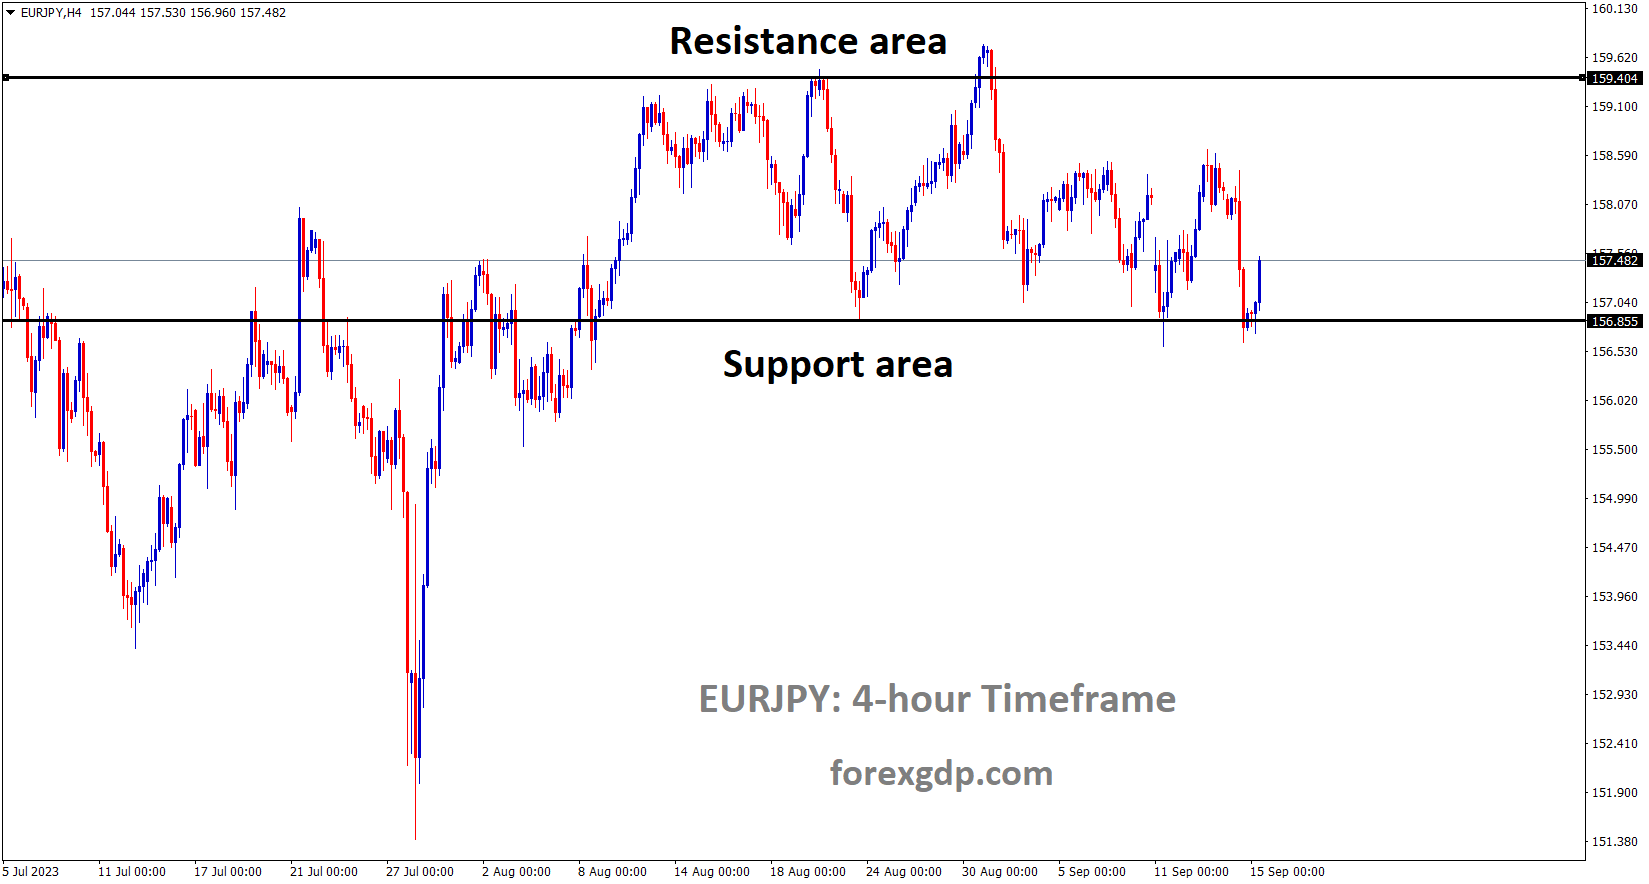 EURJPY is moving in the Box pattern and the market has rebounded from the horizontal support area of the pattern